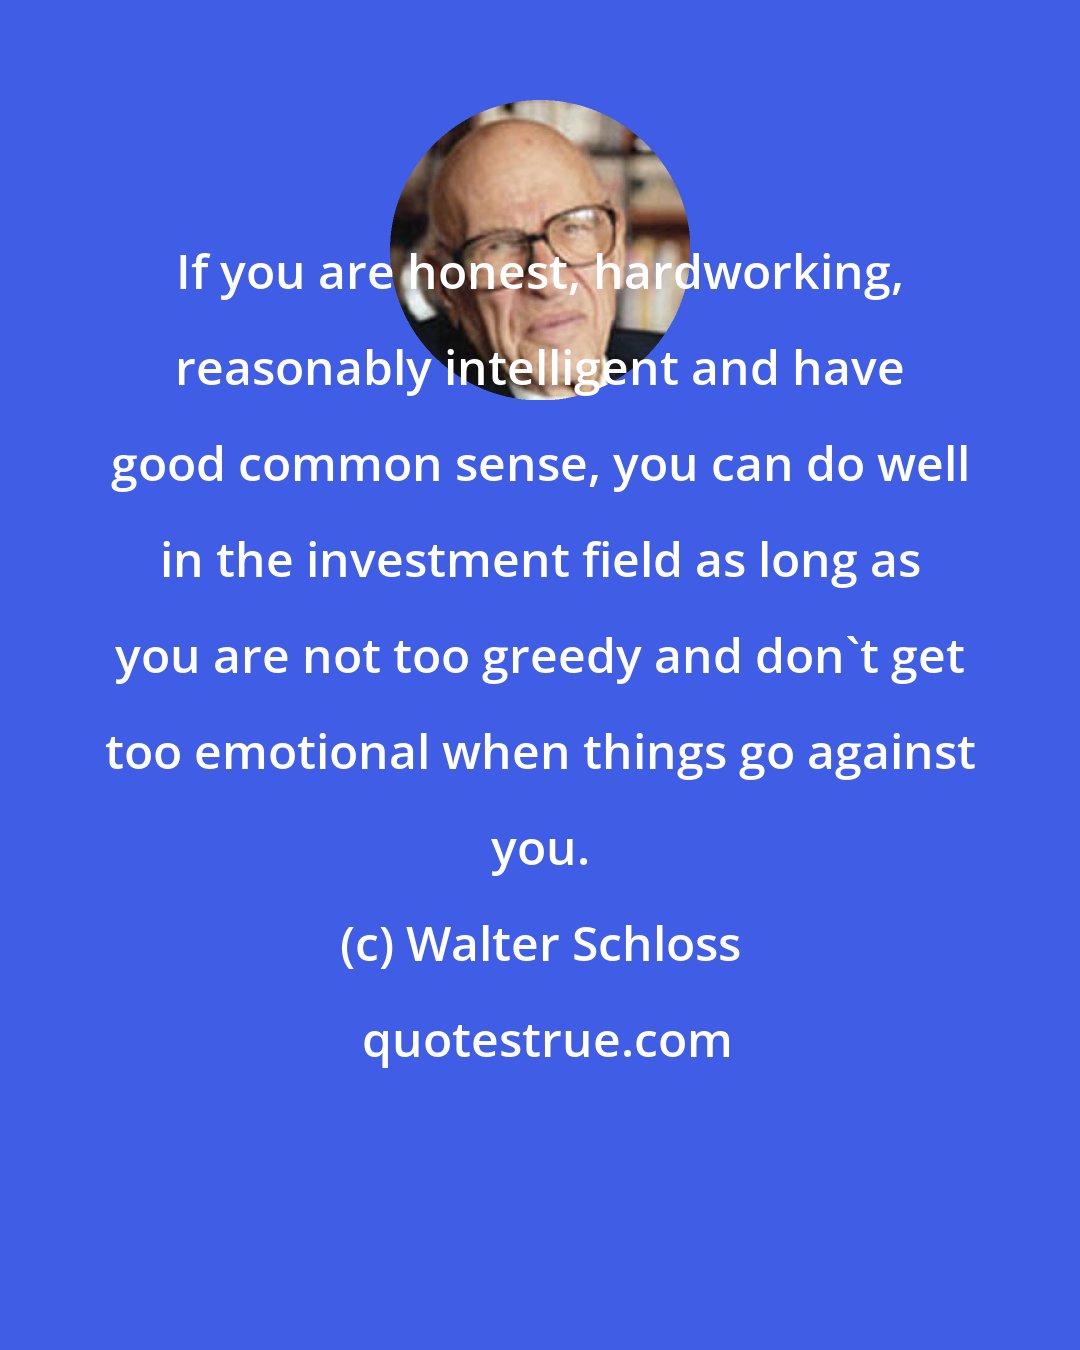 Walter Schloss: If you are honest, hardworking, reasonably intelligent and have good common sense, you can do well in the investment field as long as you are not too greedy and don't get too emotional when things go against you.